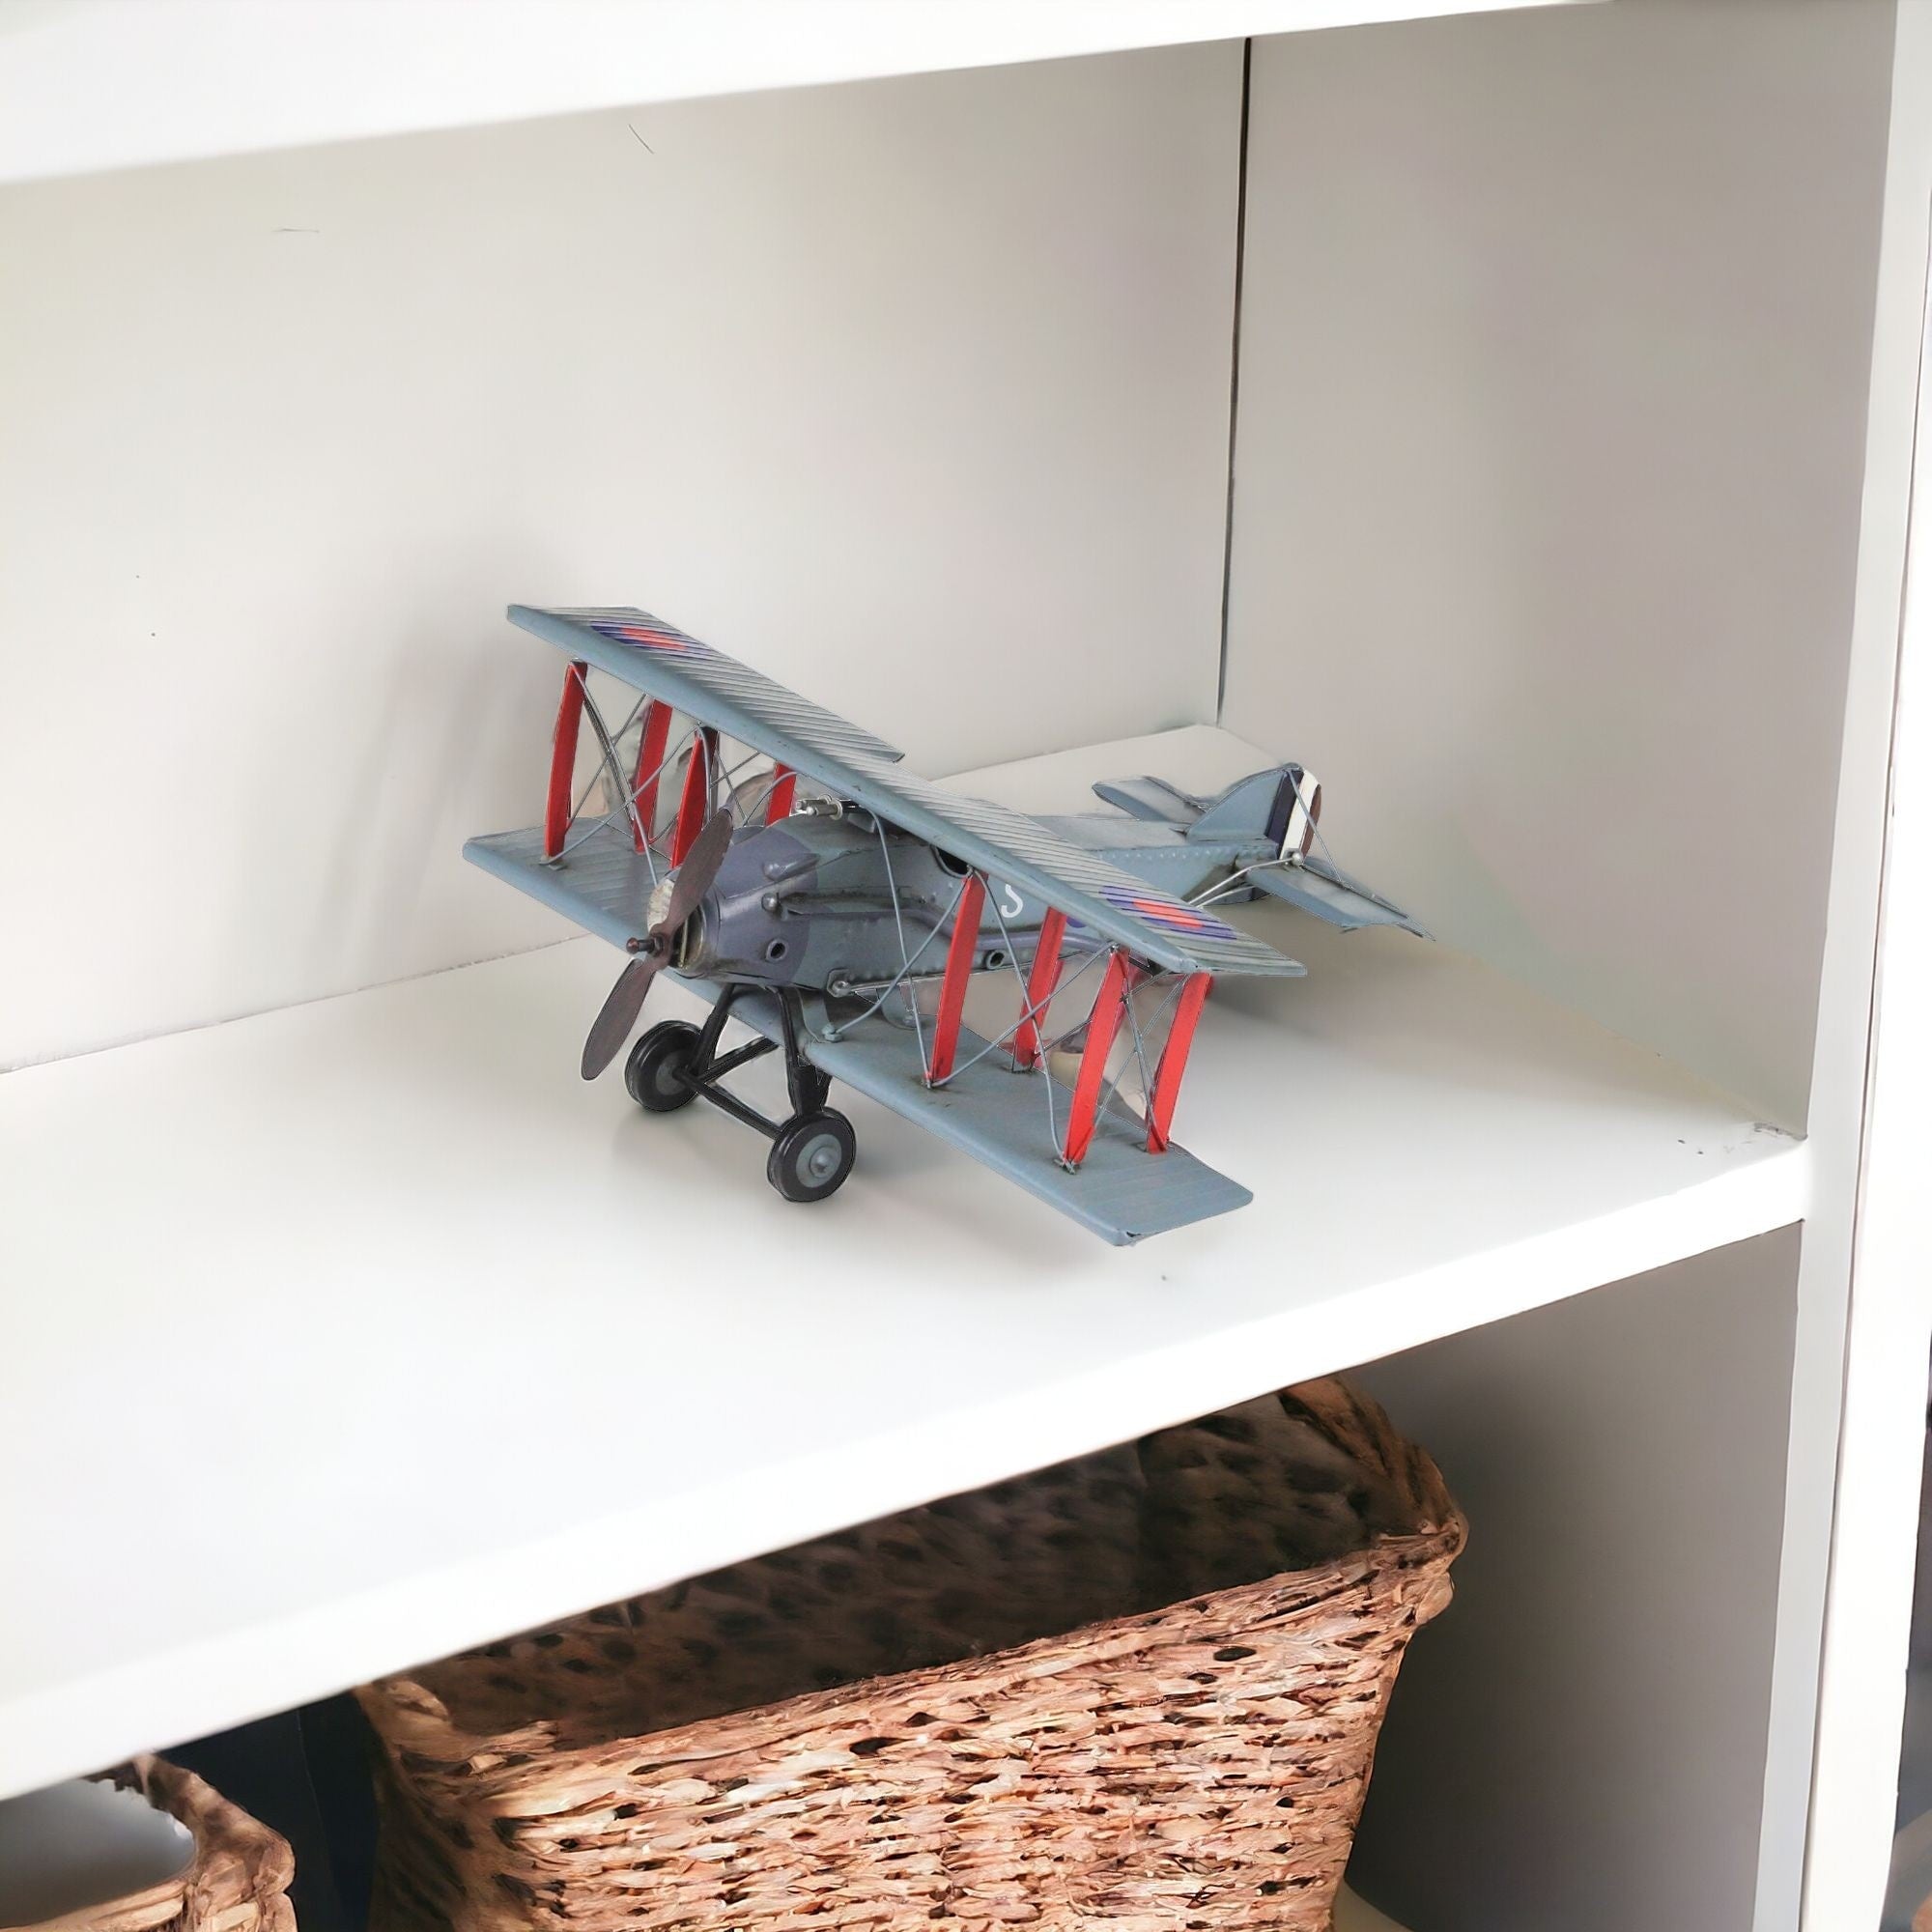 5" Red and Gray Metal Hand Painted Model Airplane